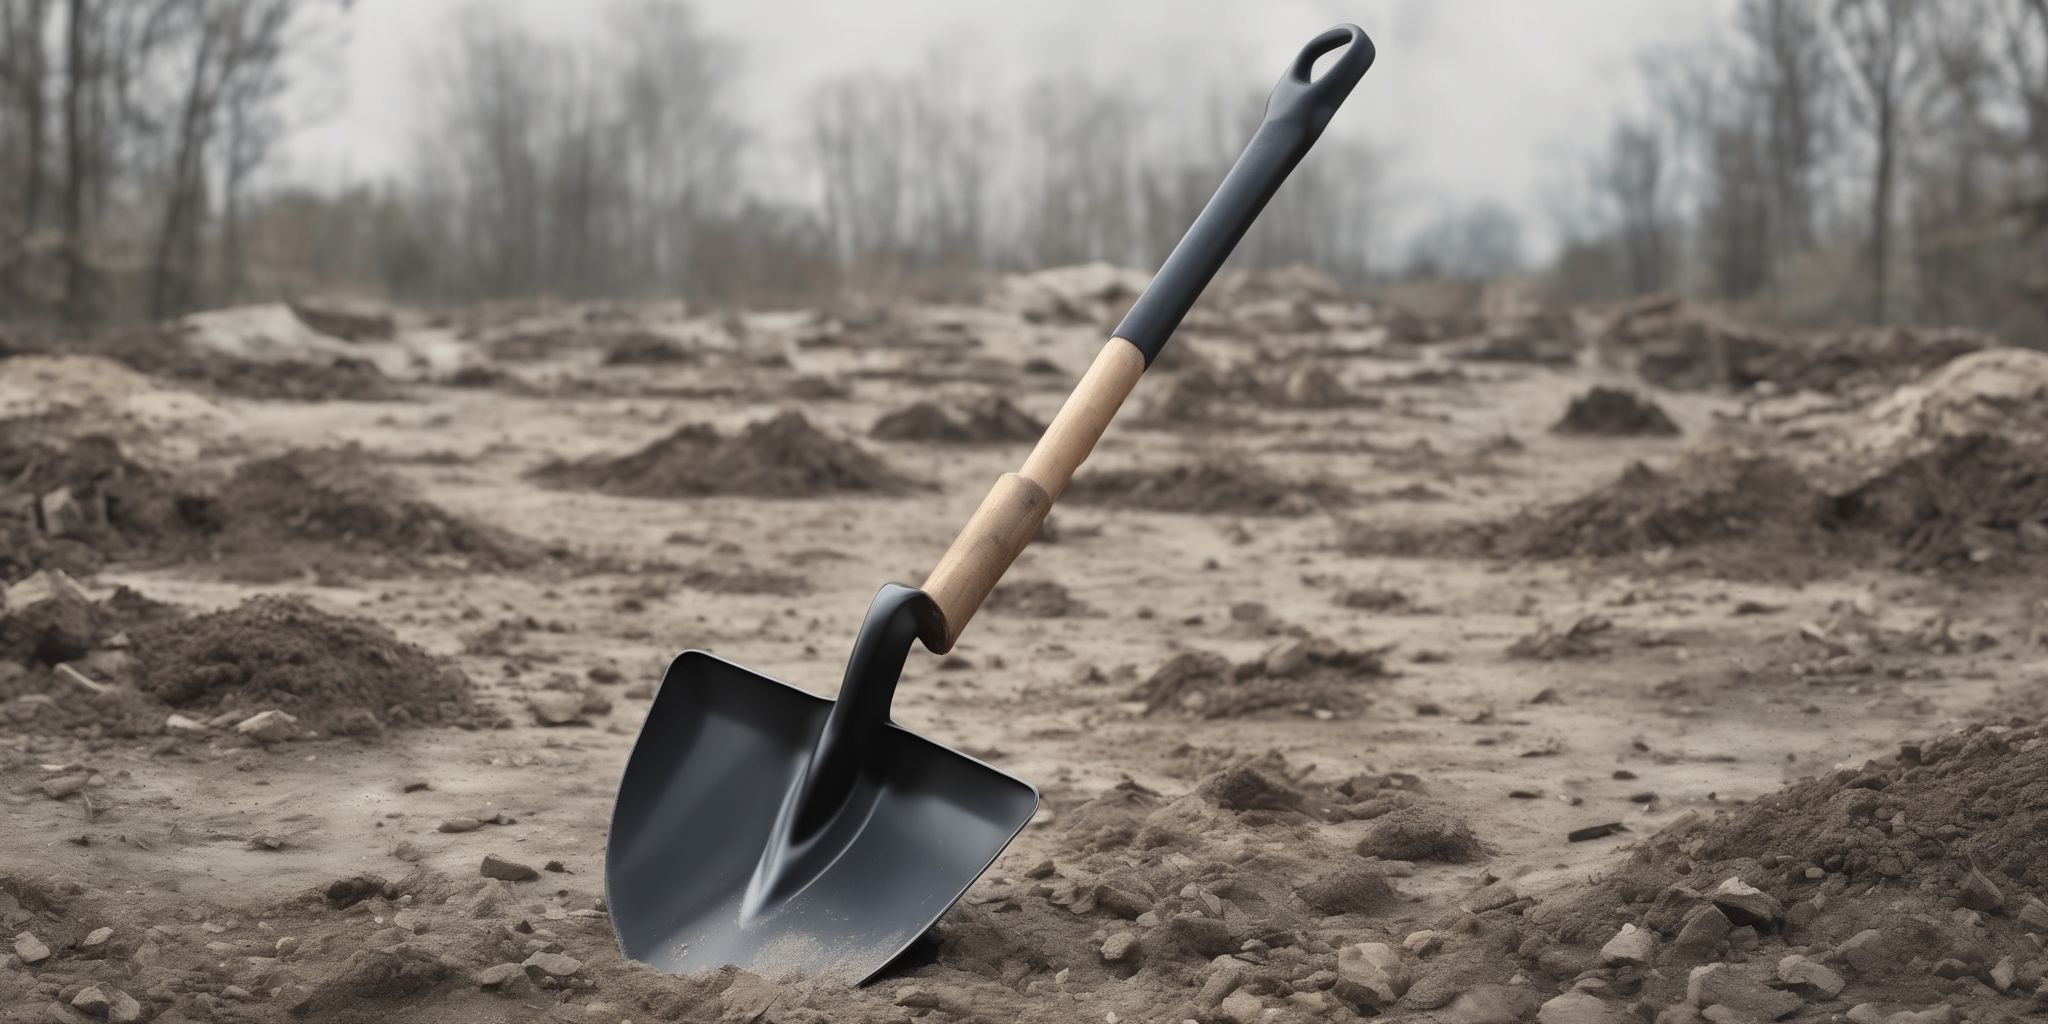 Shovel  in realistic, photographic style